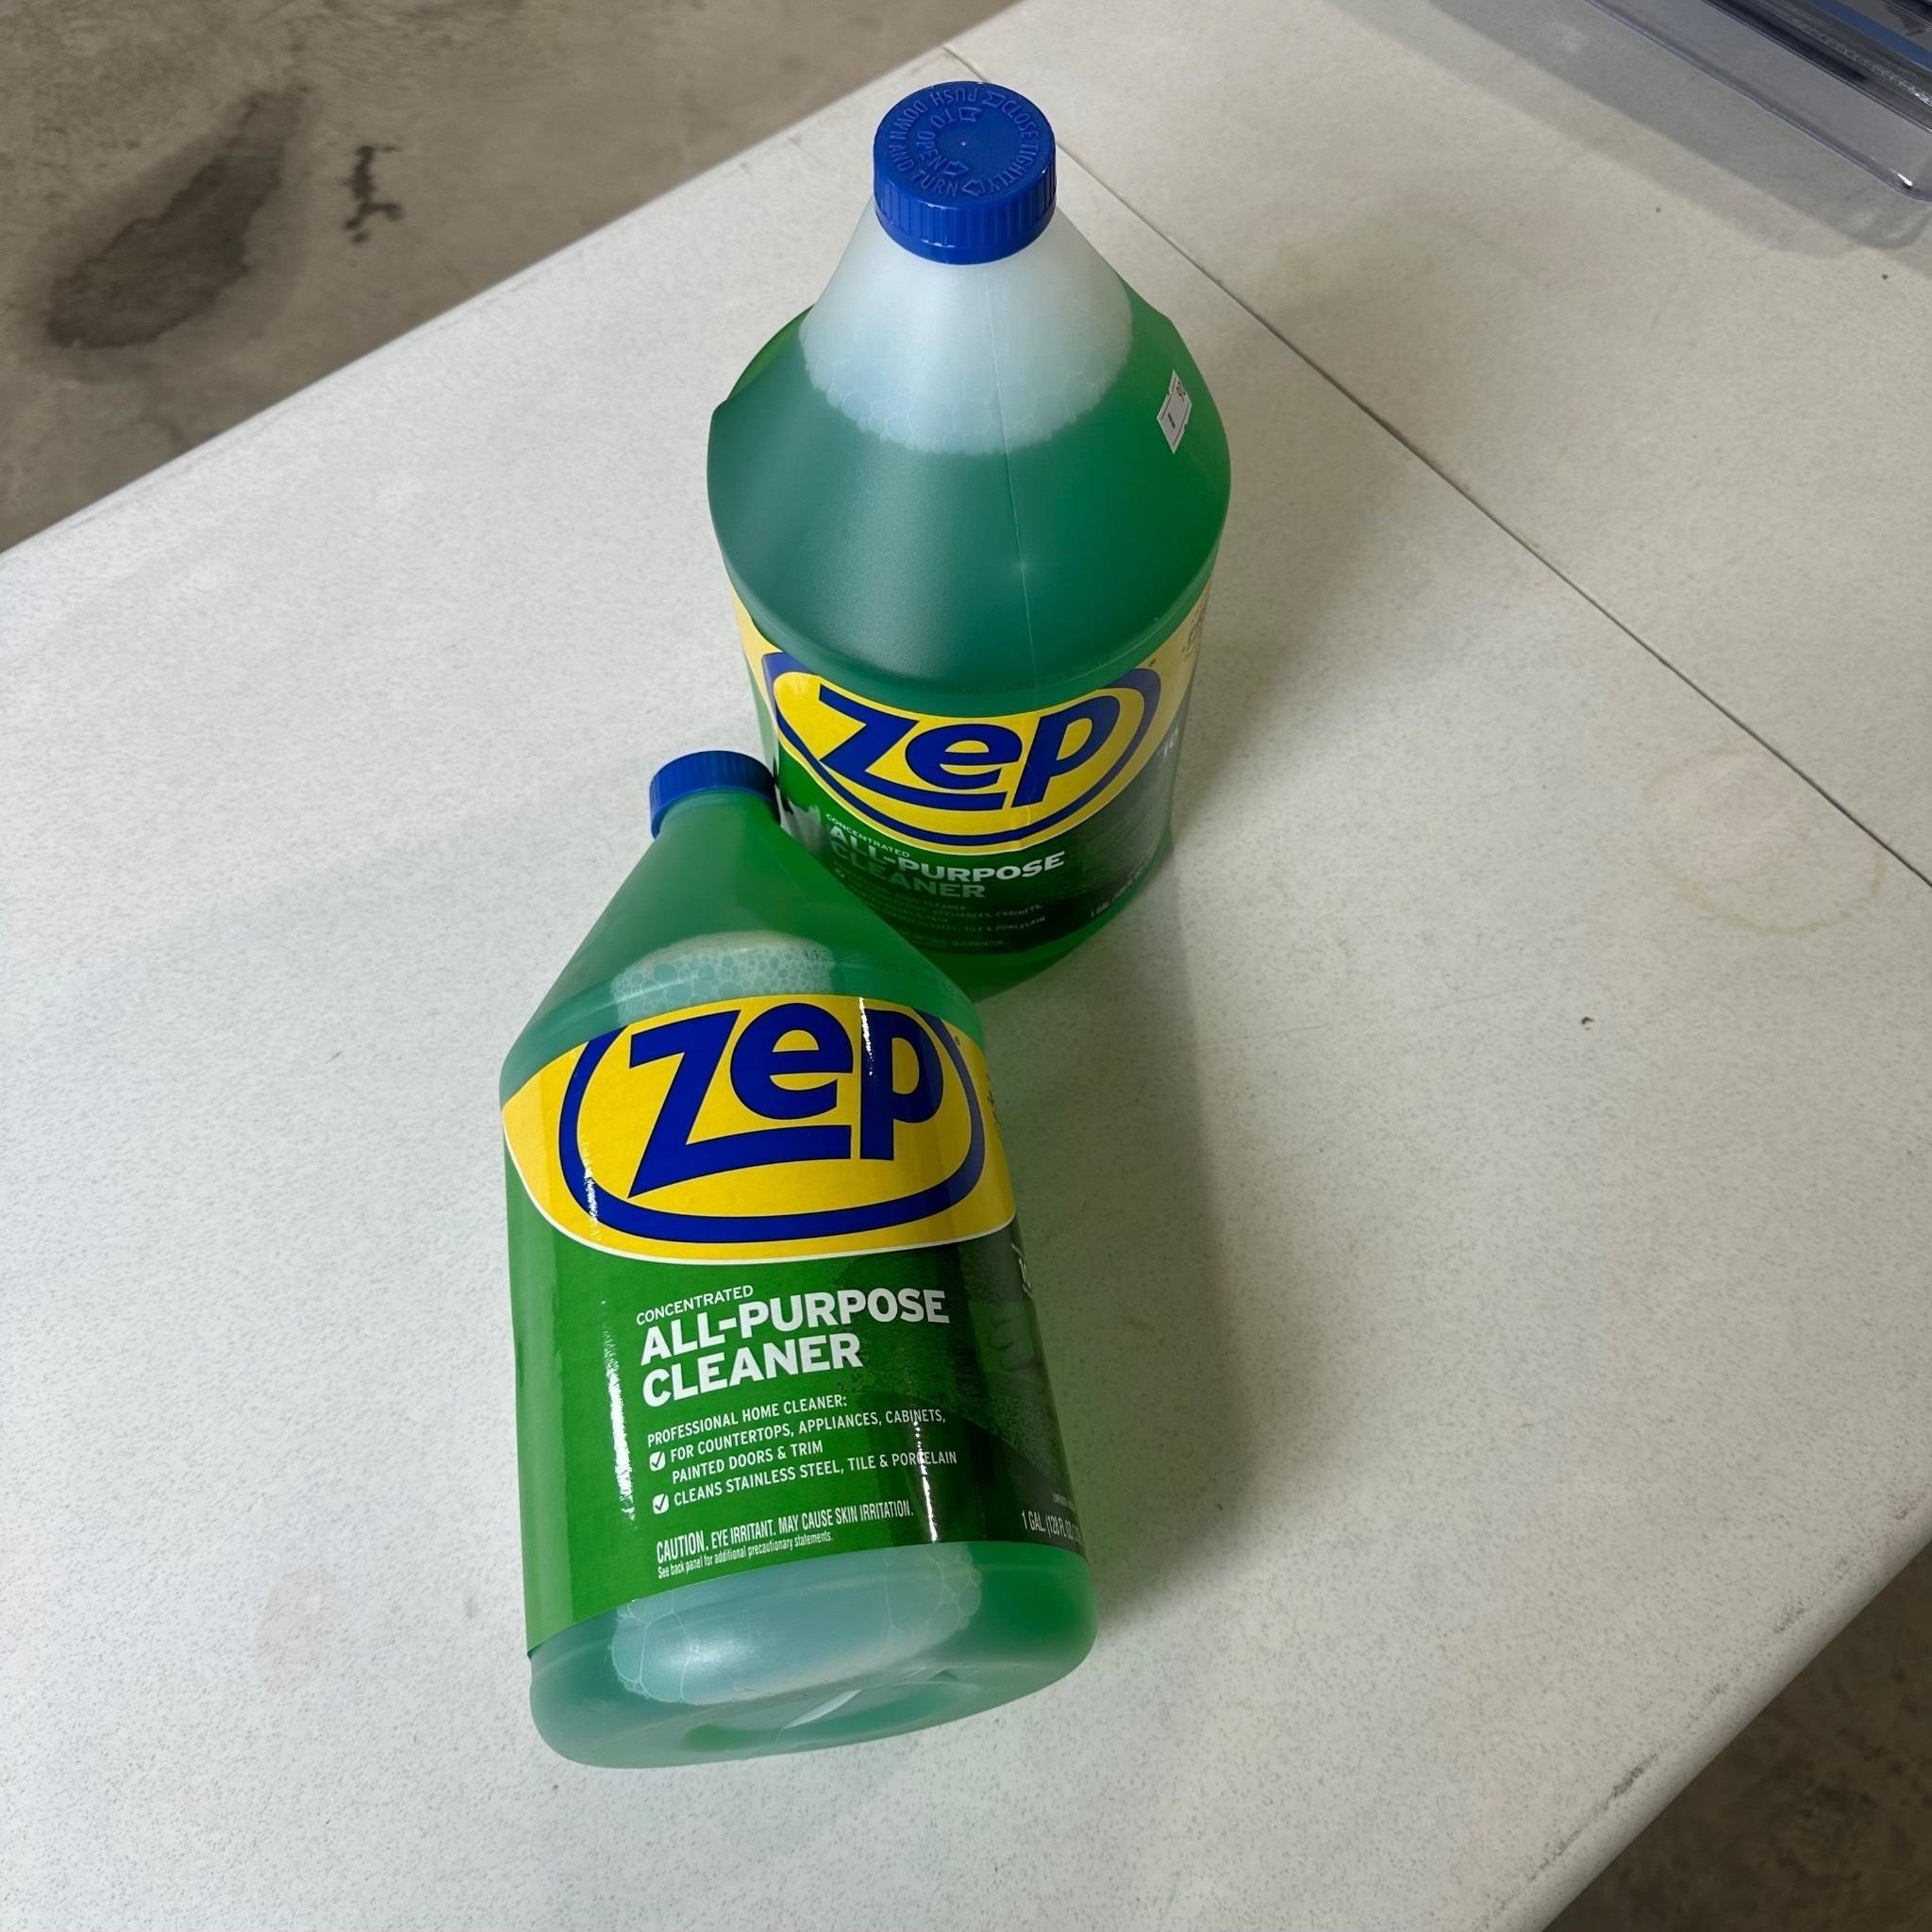 2 Gallons of Zep Concentrated All-Purpose Cleaner